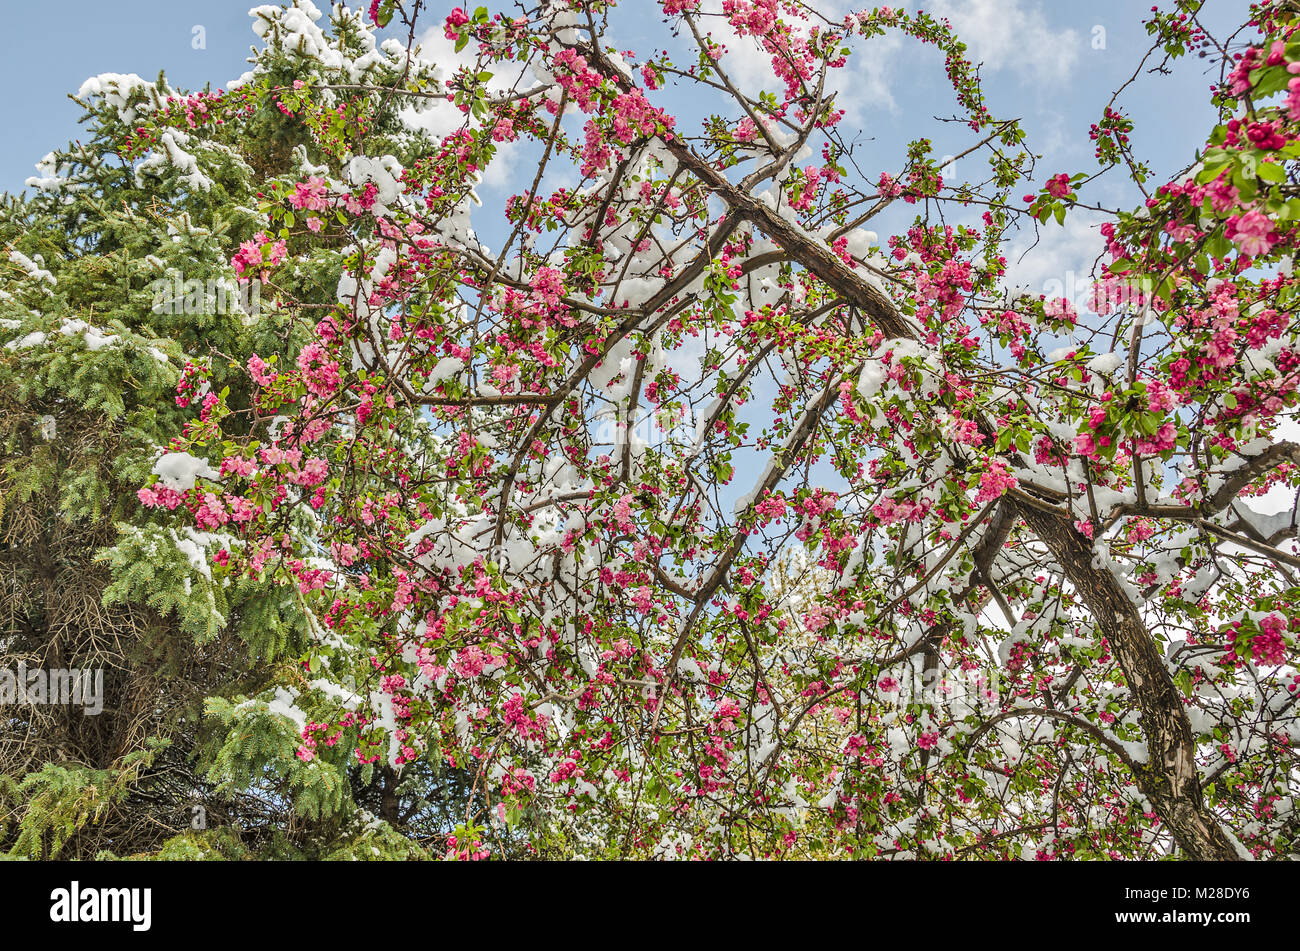 Spring snow on a crabapple tree with pink buds and blossoms and green leaves against a blue sky with scattered clouds Stock Photo